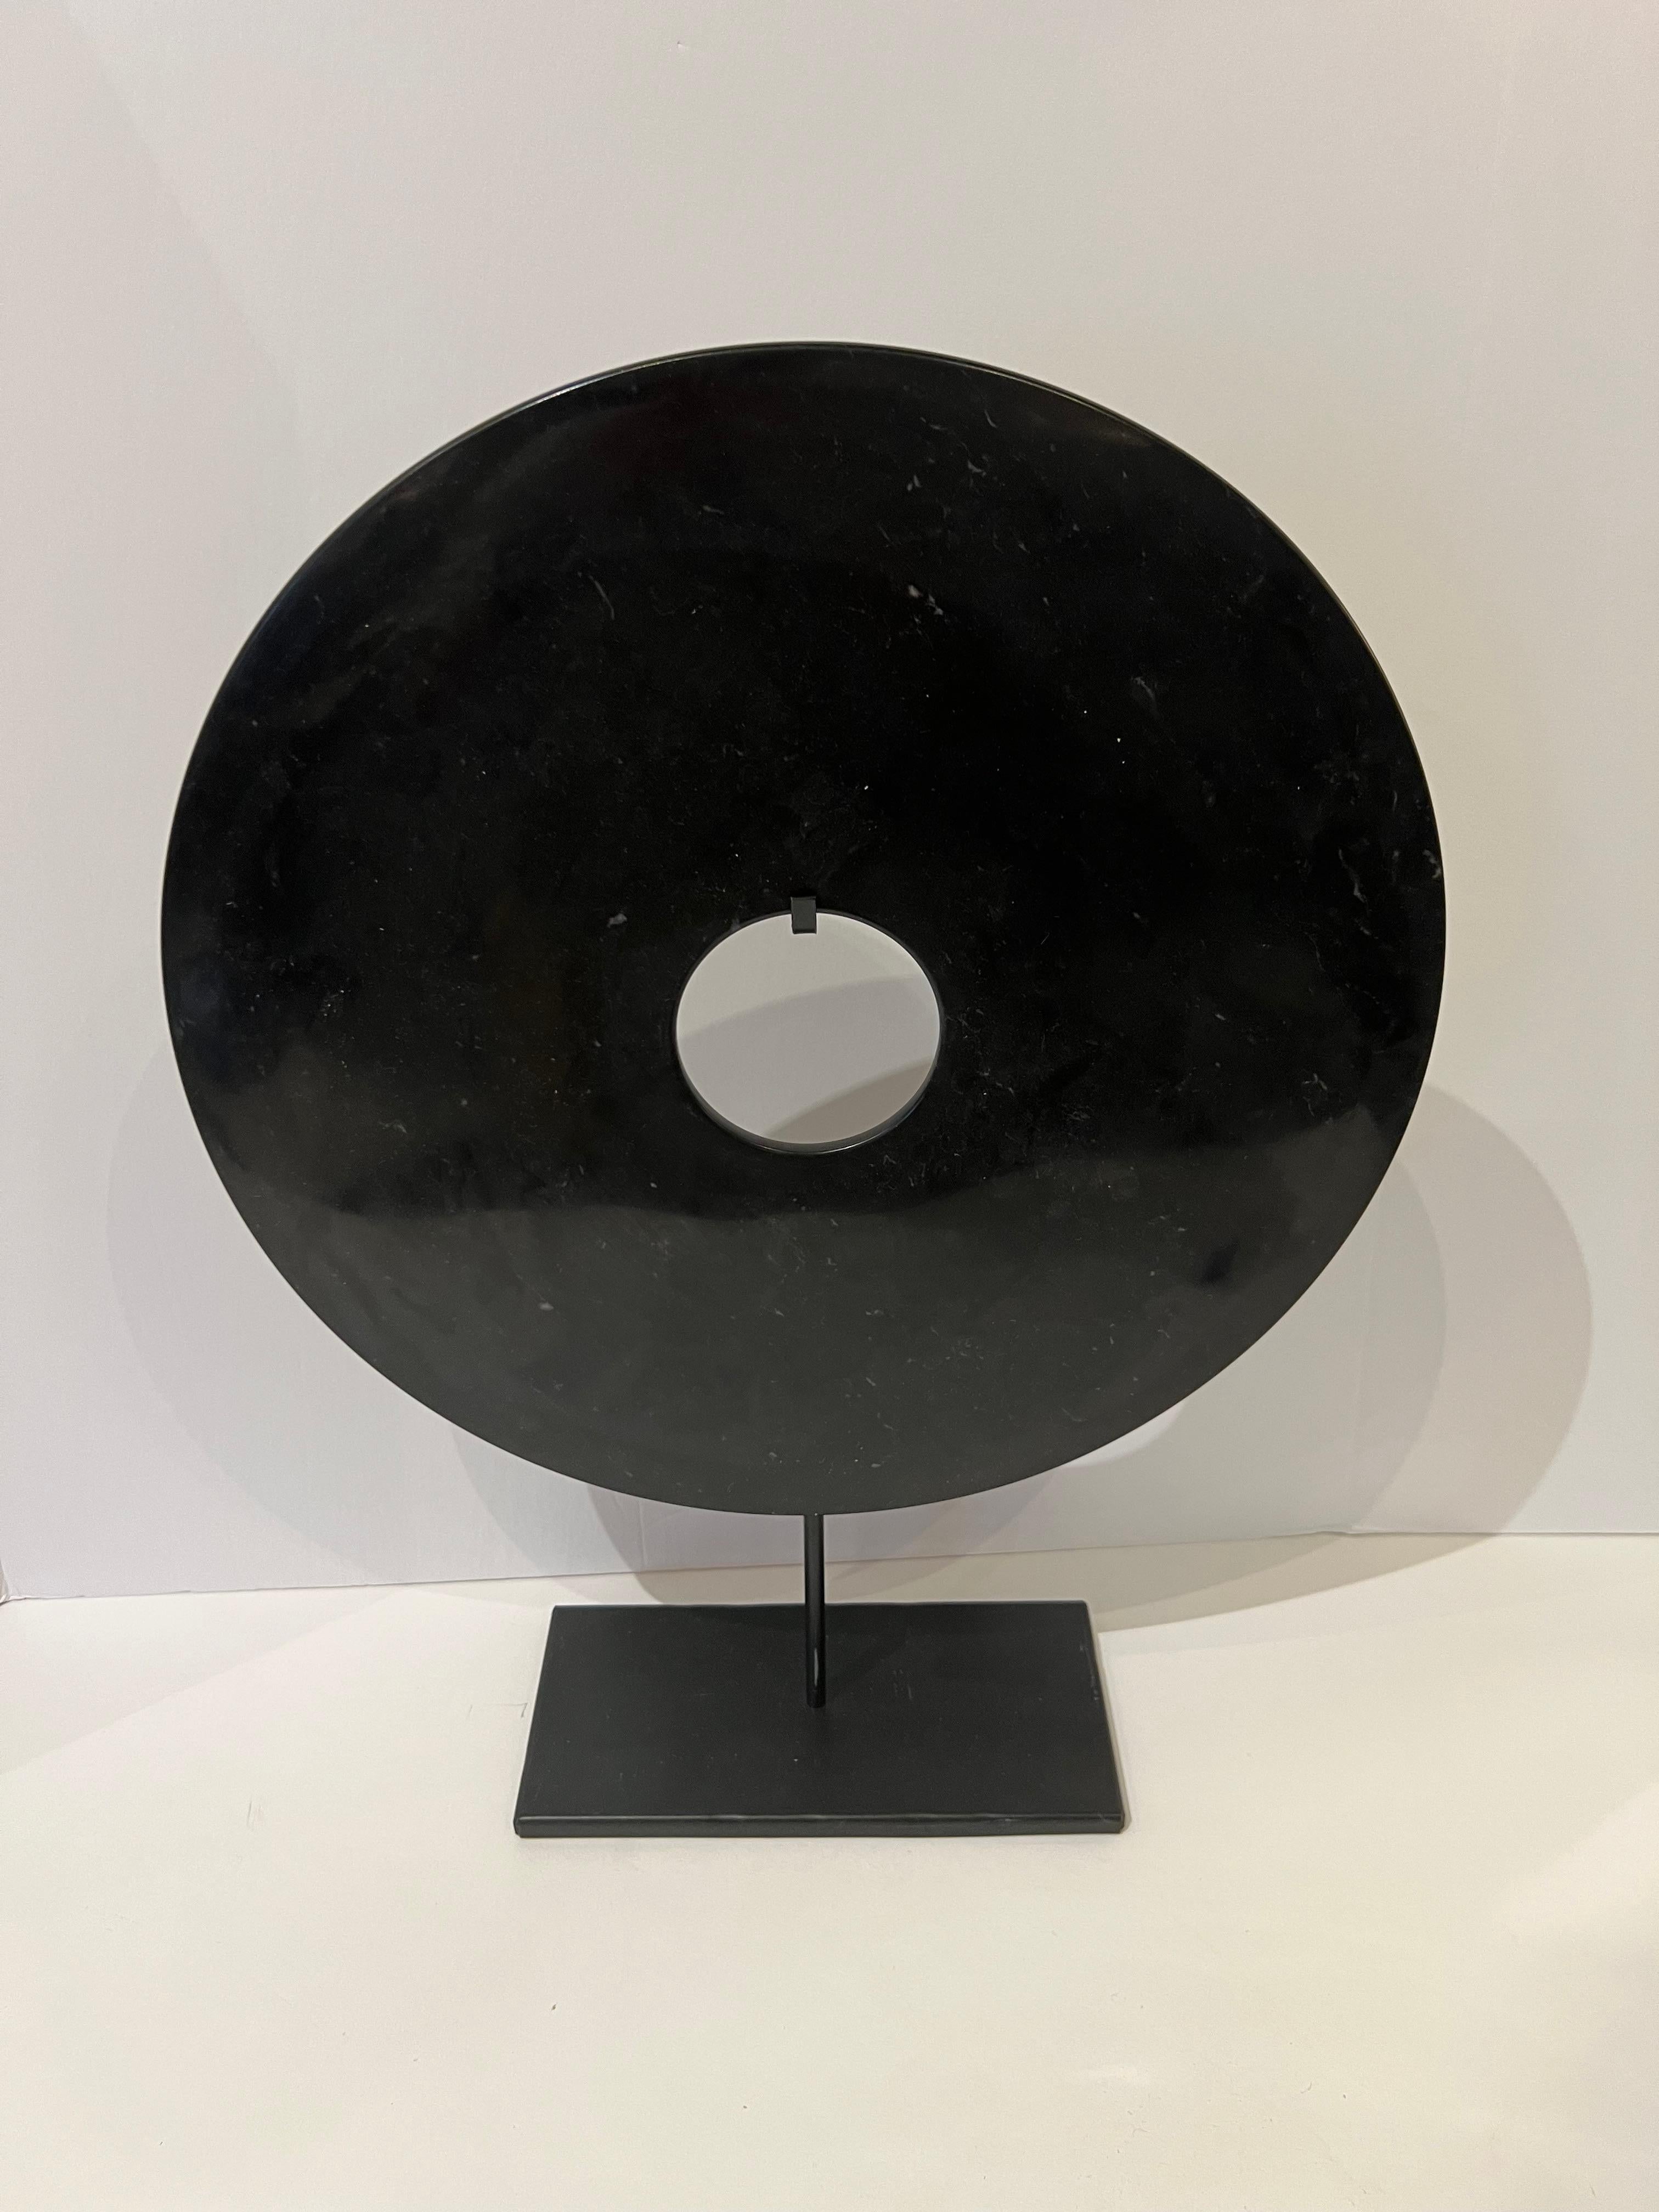 Contemporary Chinese large single smooth black jade disc sculpture on metal stand.
Also available in white ( S6451 )
Stand measures  9